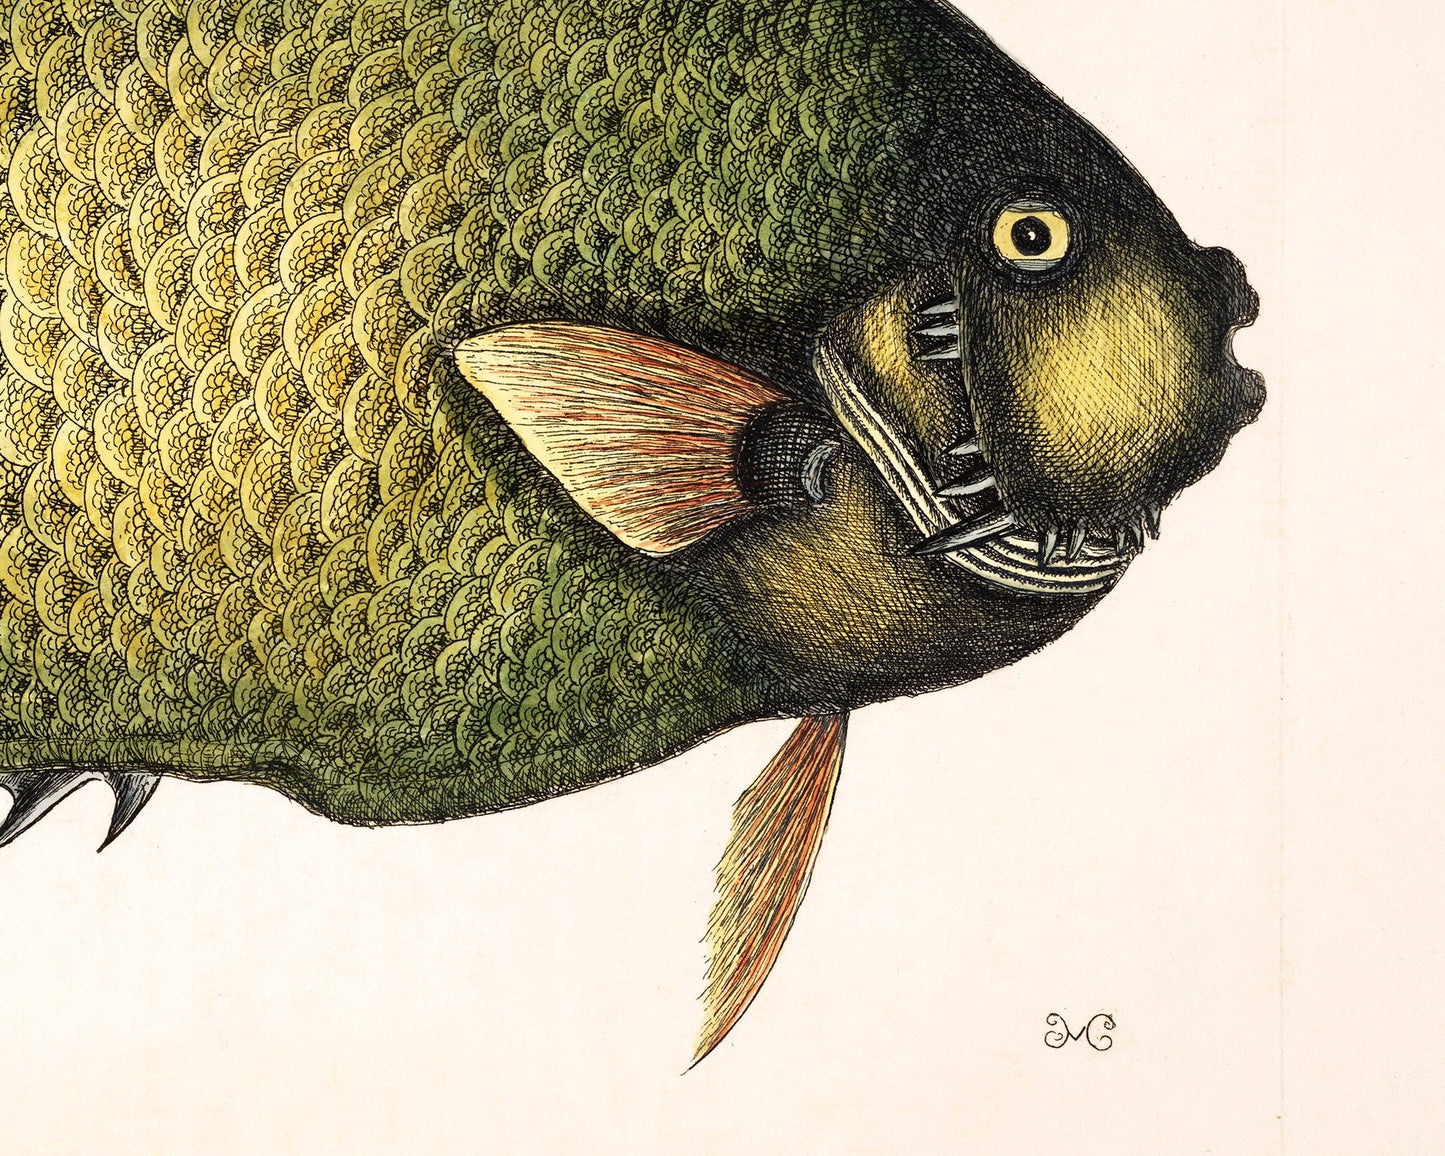 Antique angel fish | 18th century Mark Catesby | Natural history art | Water, ocean animal | Modern vintage décor | Eco-friendly gift